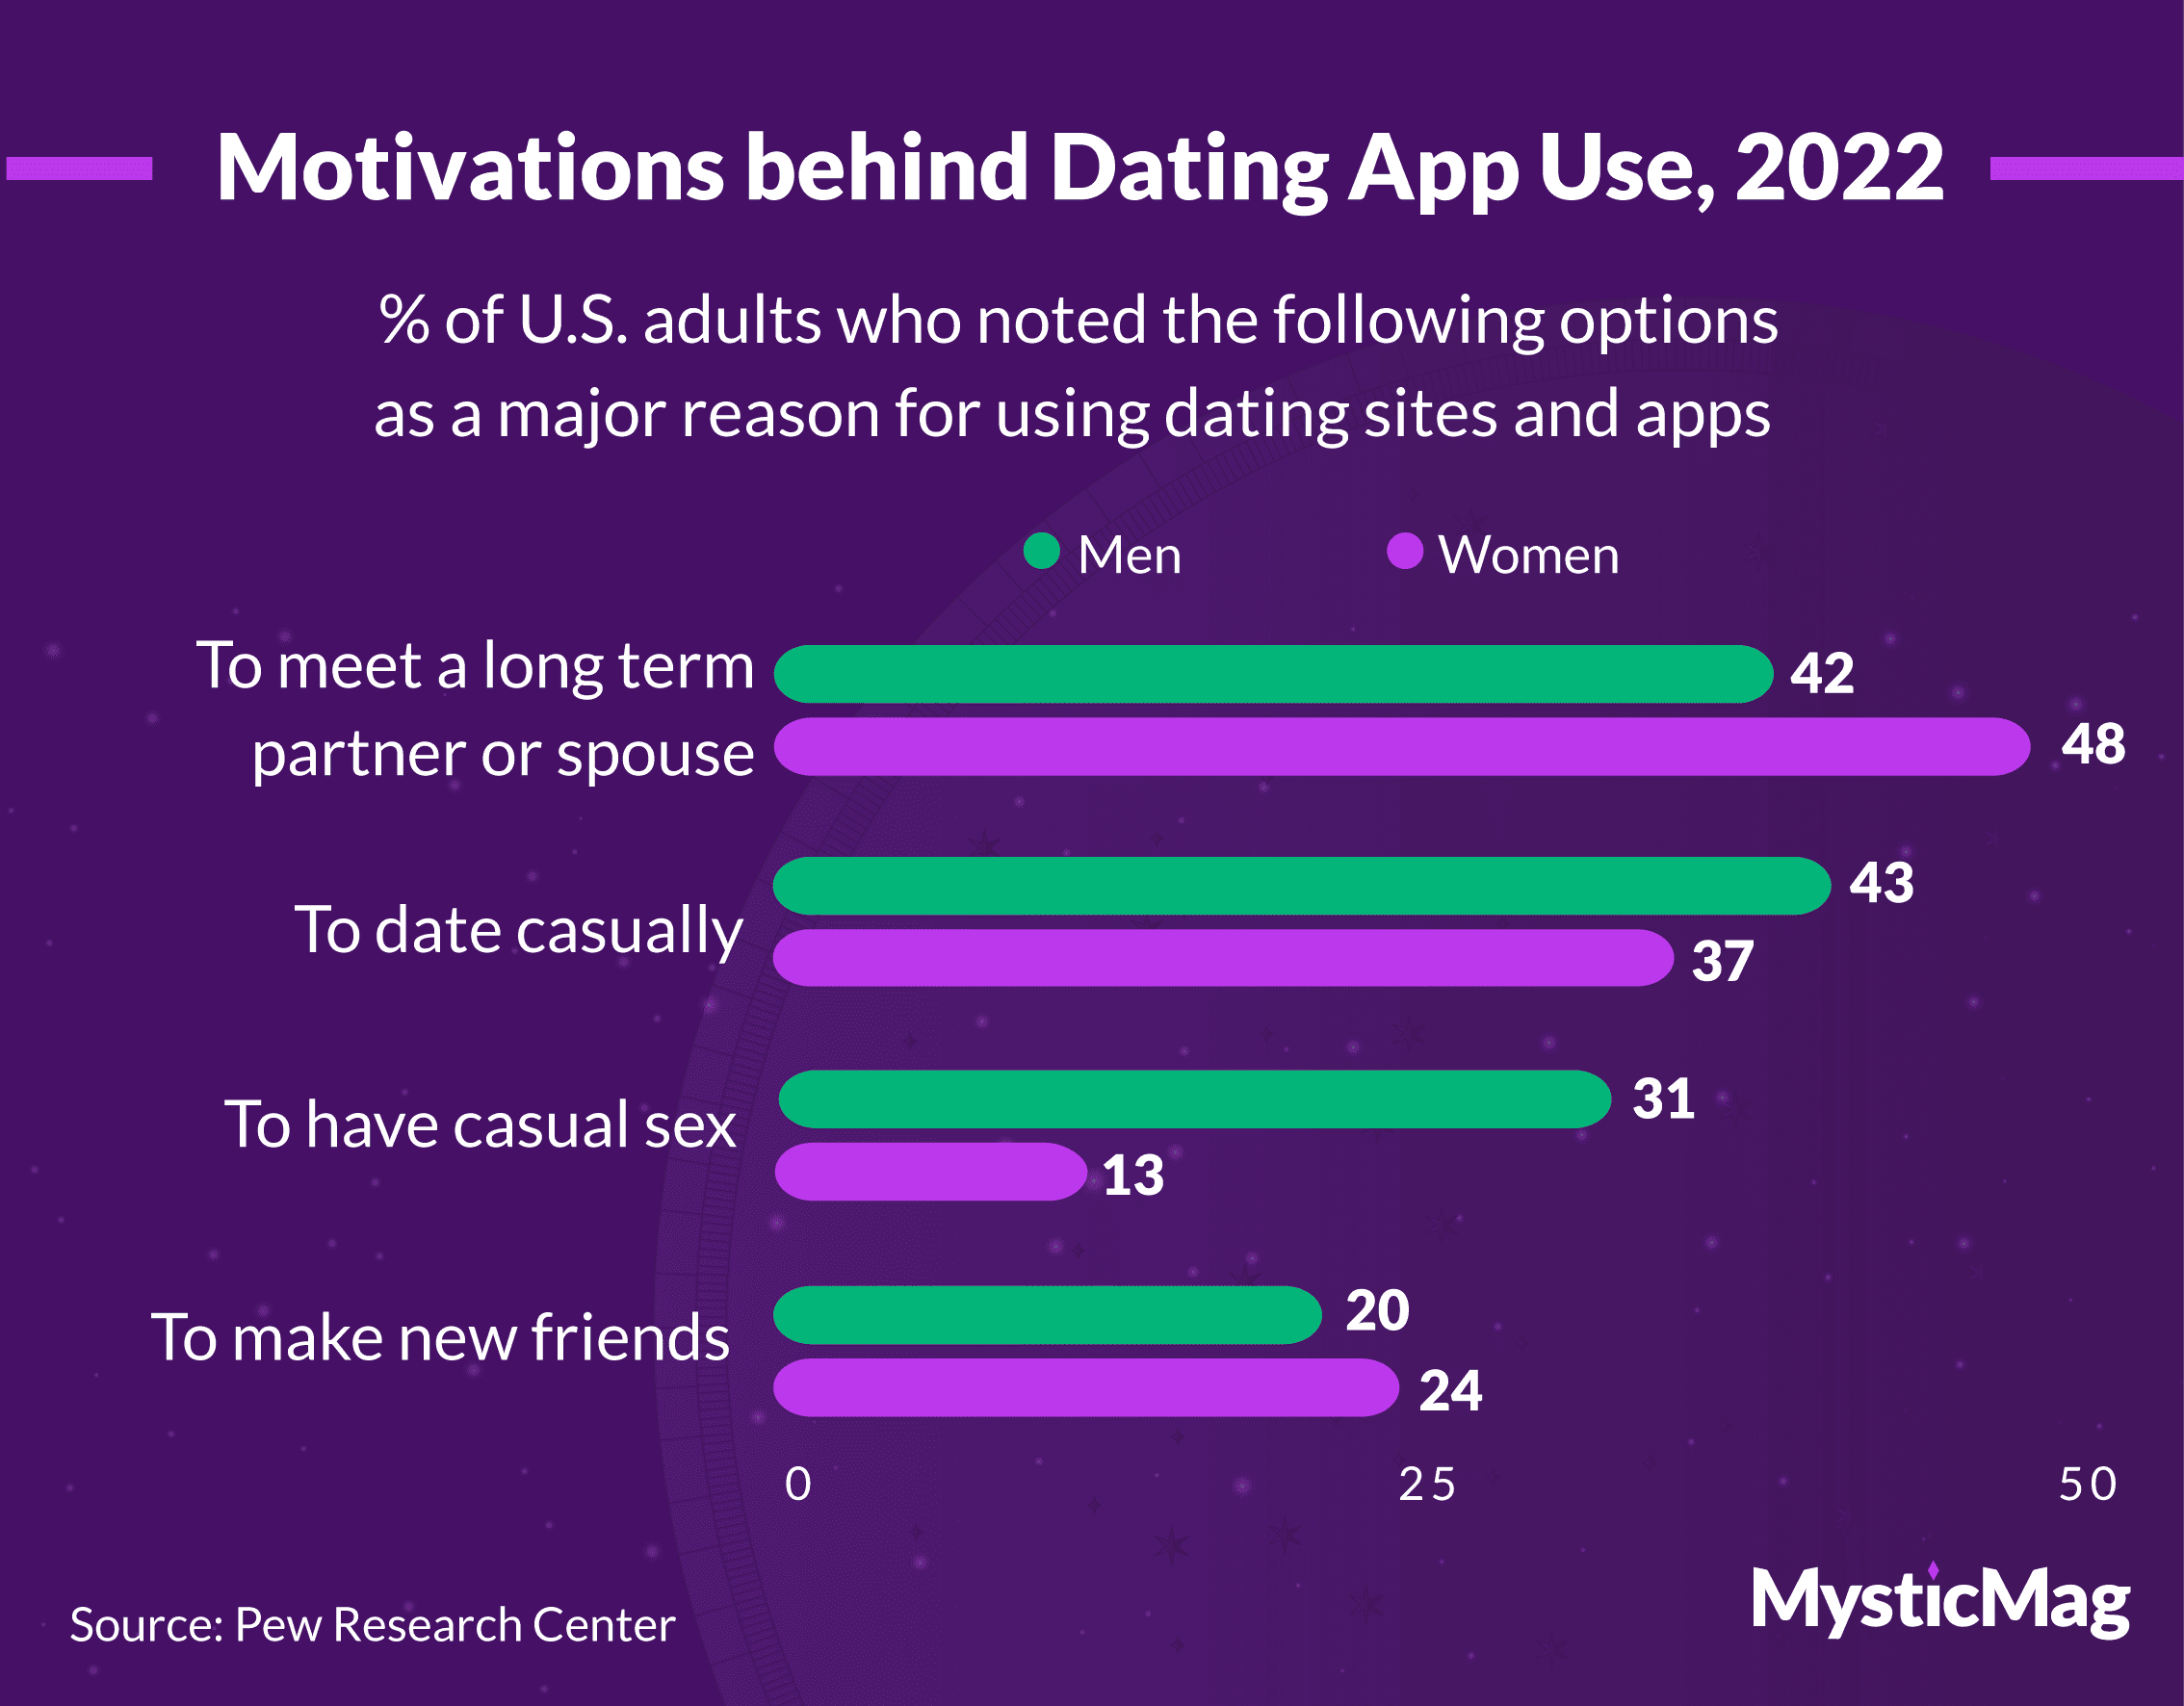 Motivations for using dating apps, 2022